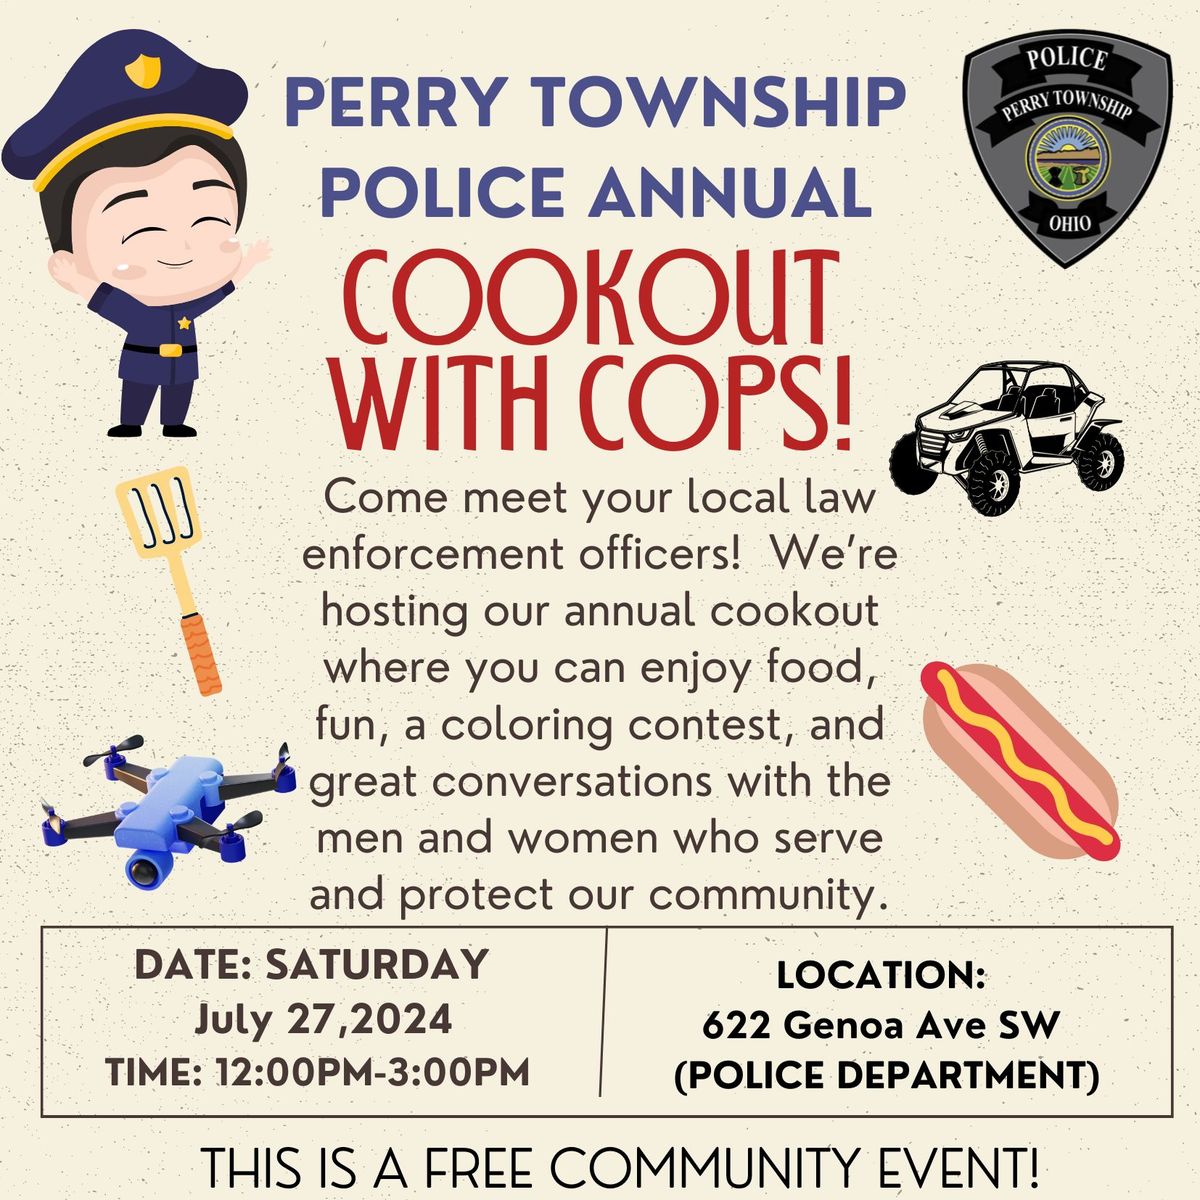 Perry Township Police Annual Cookout With Cops!